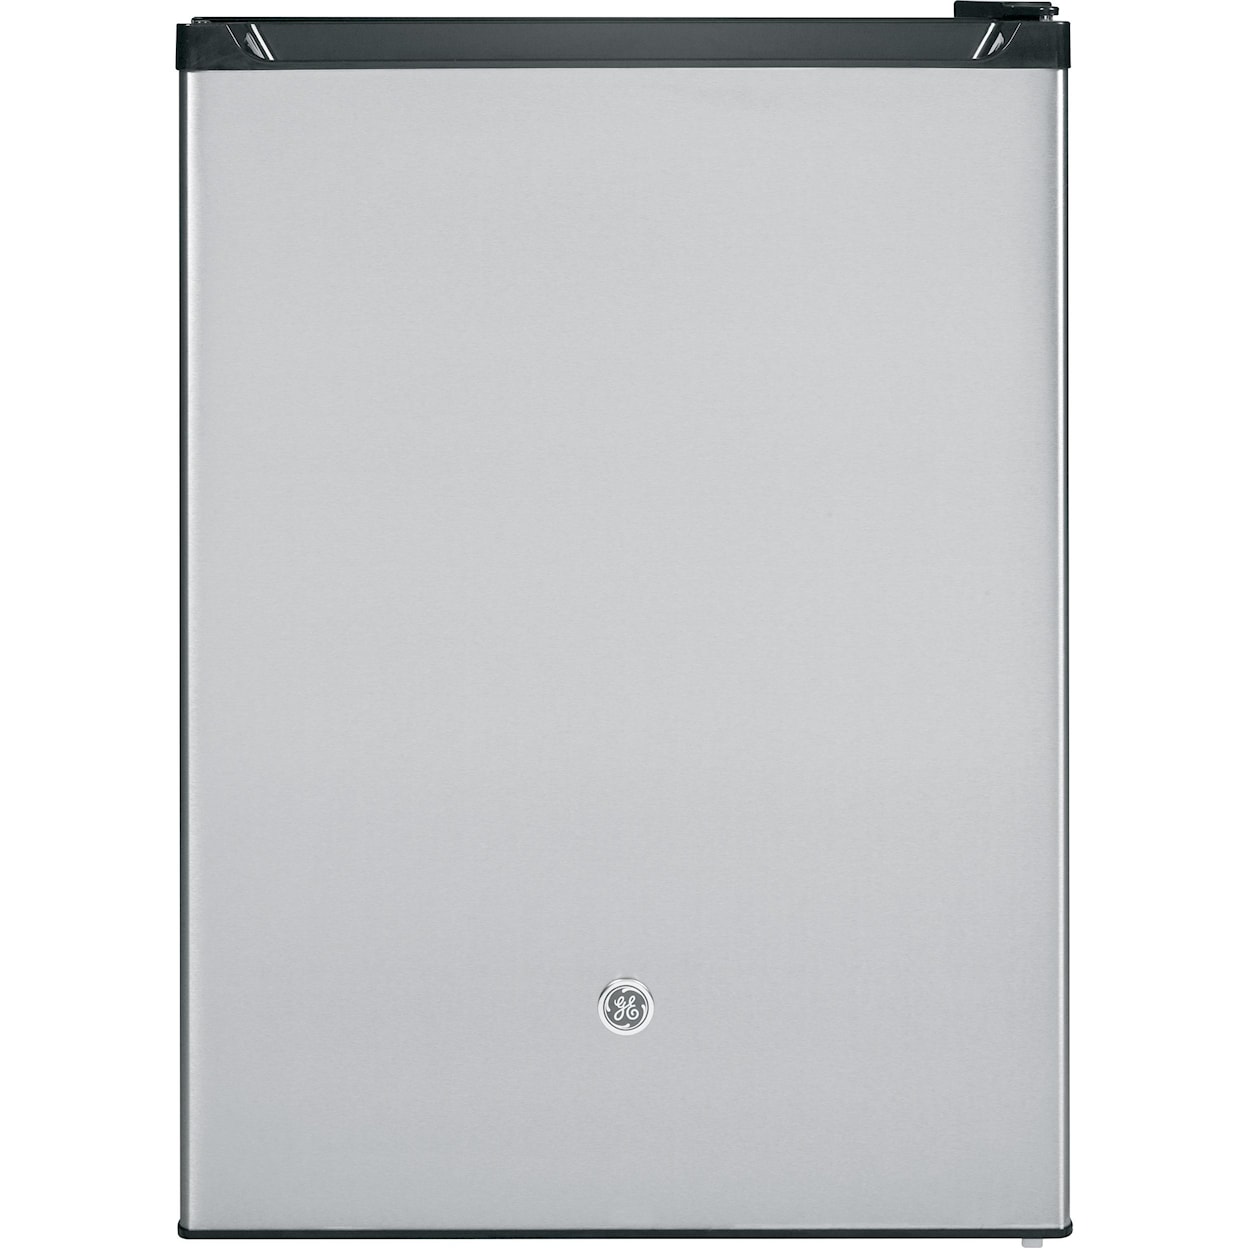 GE Appliances Compact Refrigerators - GE Spacemaker® Compact Refrigerator